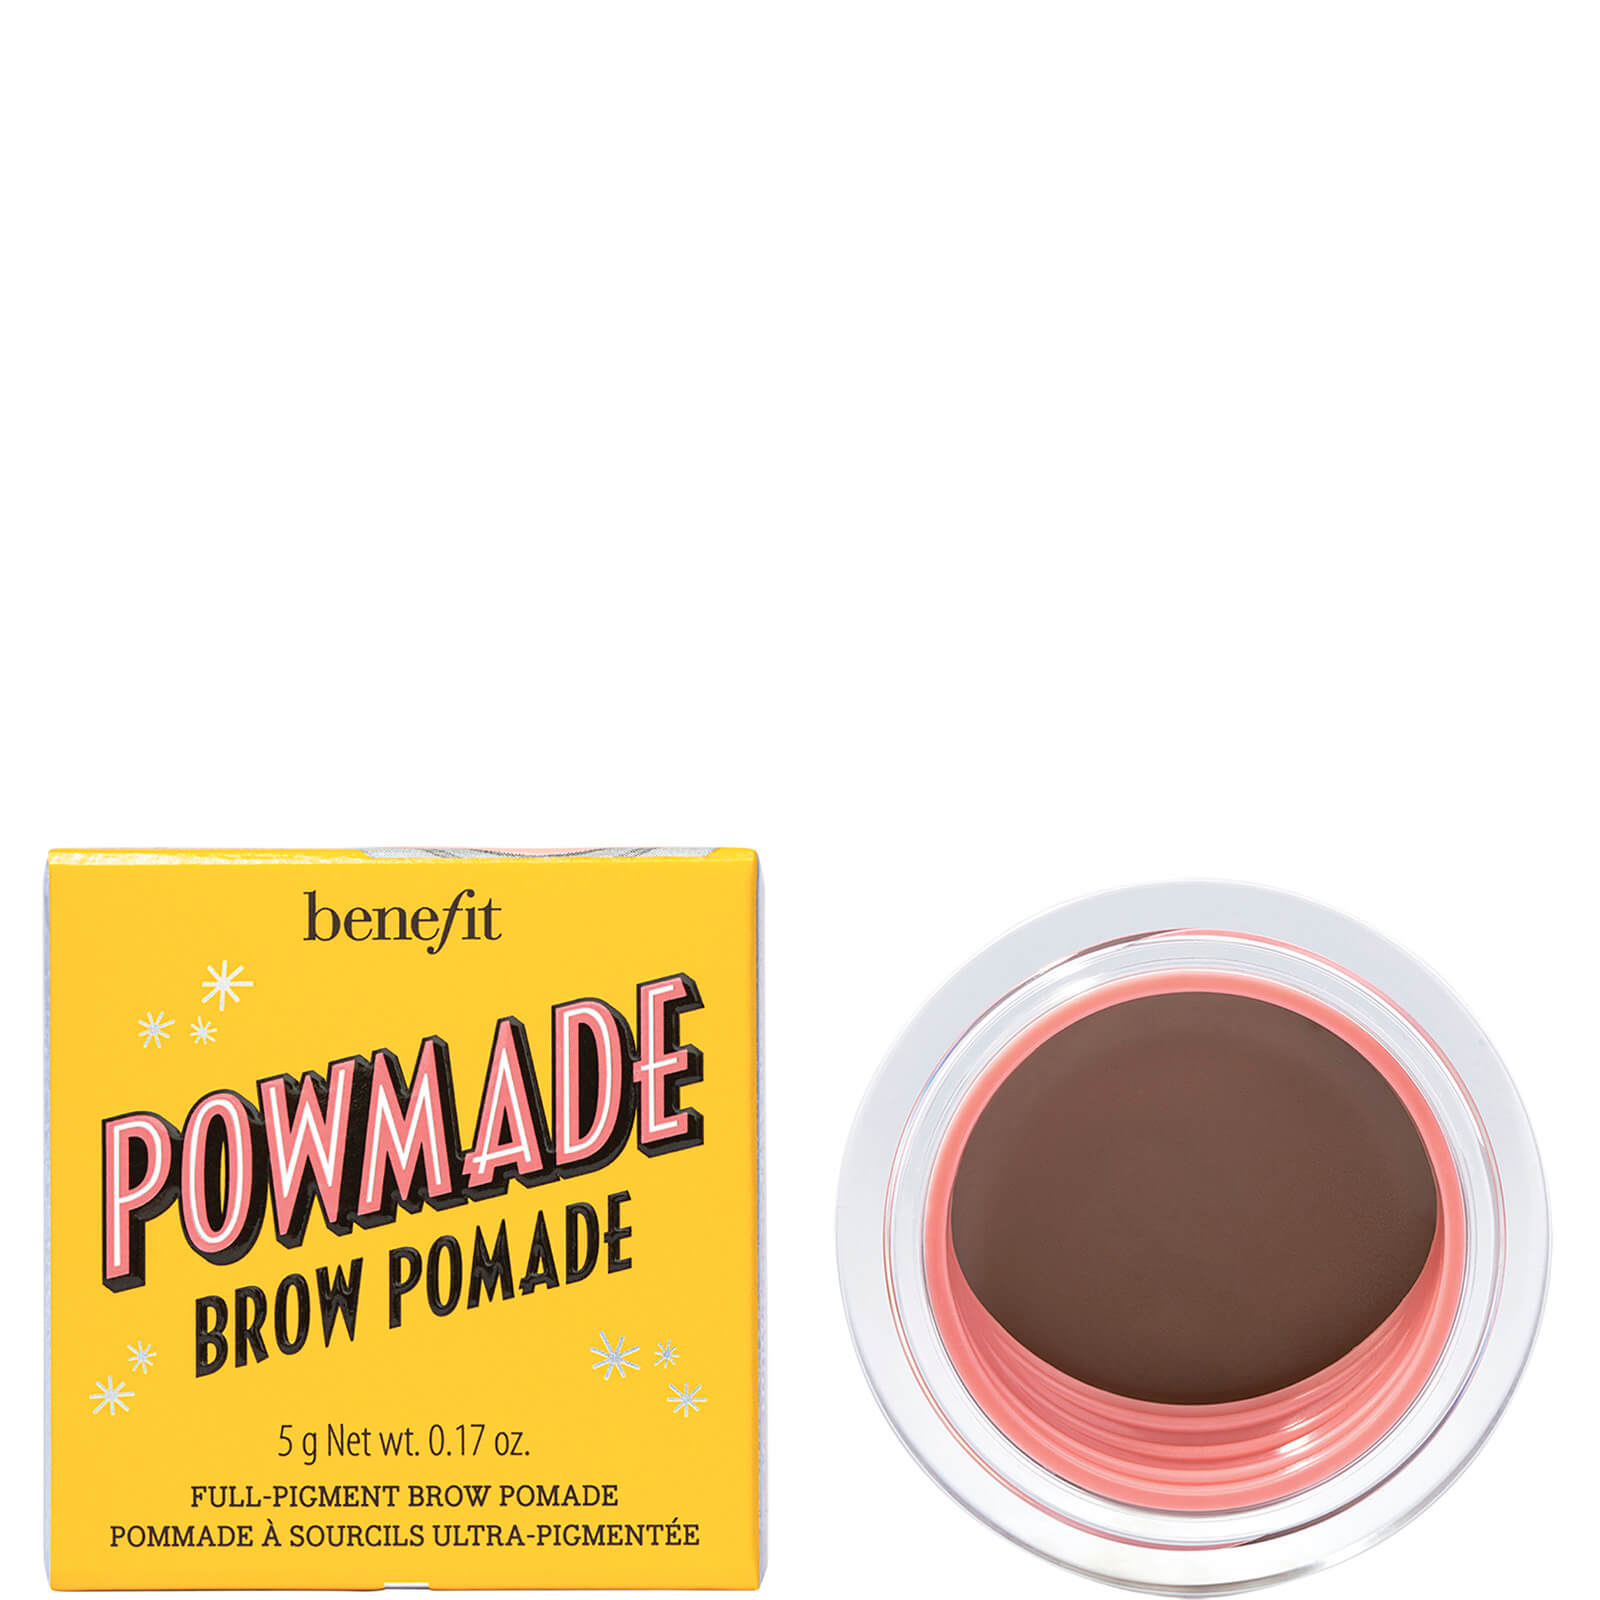 benefit Powmade Full Pigment Eyebrow Pomade 5g (Various Shades) - 2 Warm Golden Blonde